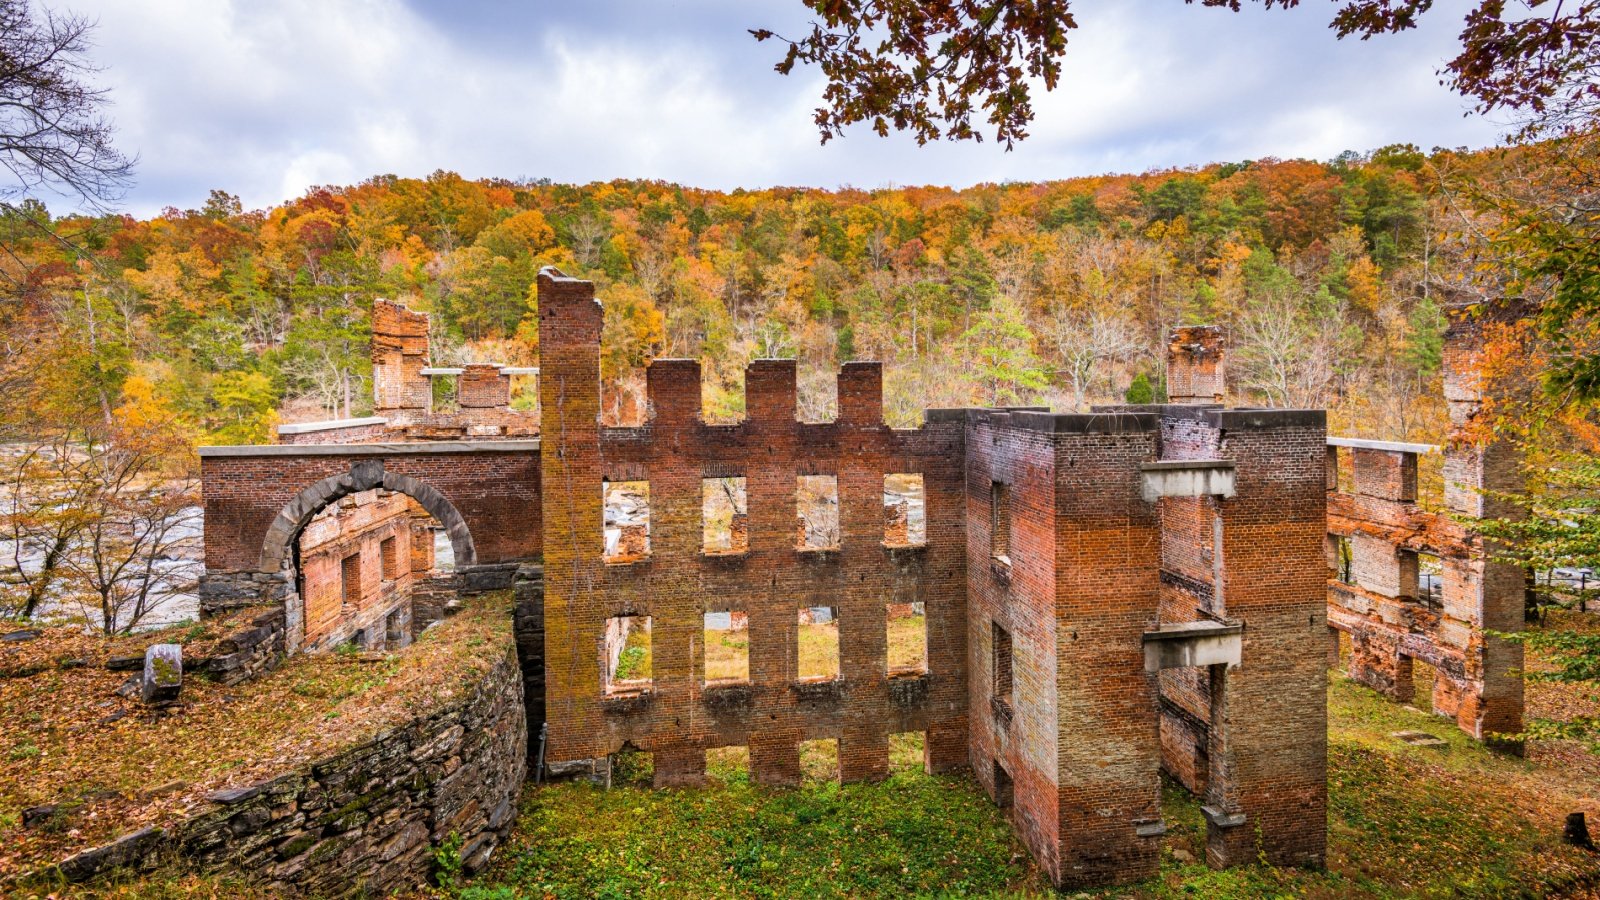 <p>The movie-loving family will love the self-guided tour at the Douglas County Film Trail near Douglasville. Explore the film locations of The Hunger Games (2012), The Walking Dead (2010-2022), and Avengers: Infinity War (2018). Does the family love Stranger Things (2016-2025)? If so, follow the film trail signs to see where Jim Hopper investigated the paranormal activity in this popular series.</p>